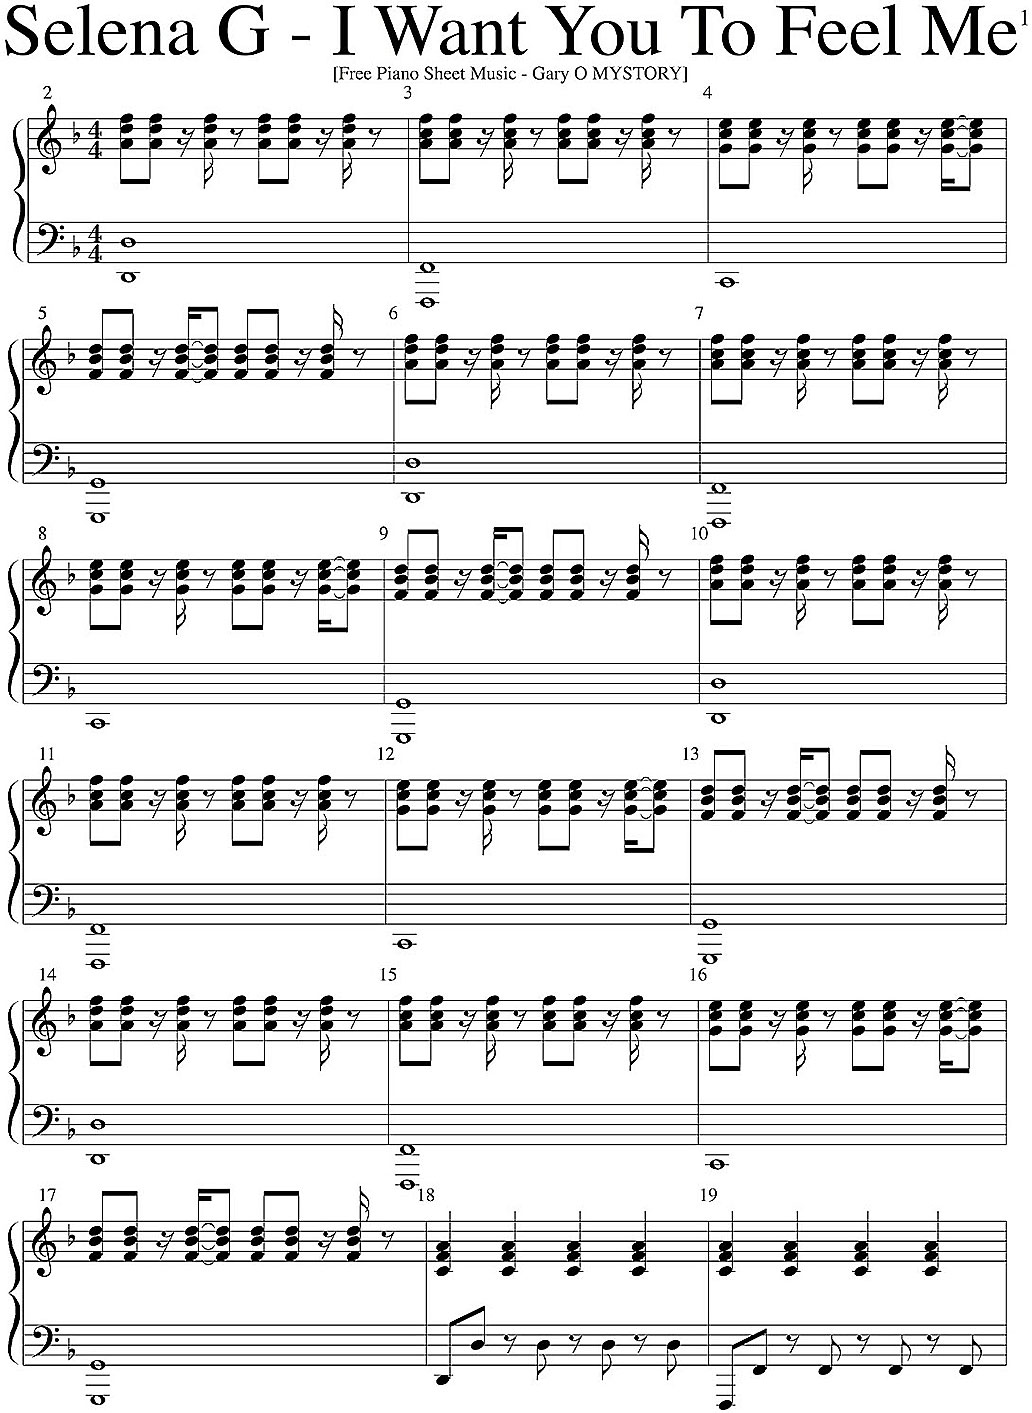 I want you to feel me piano sheet music notes